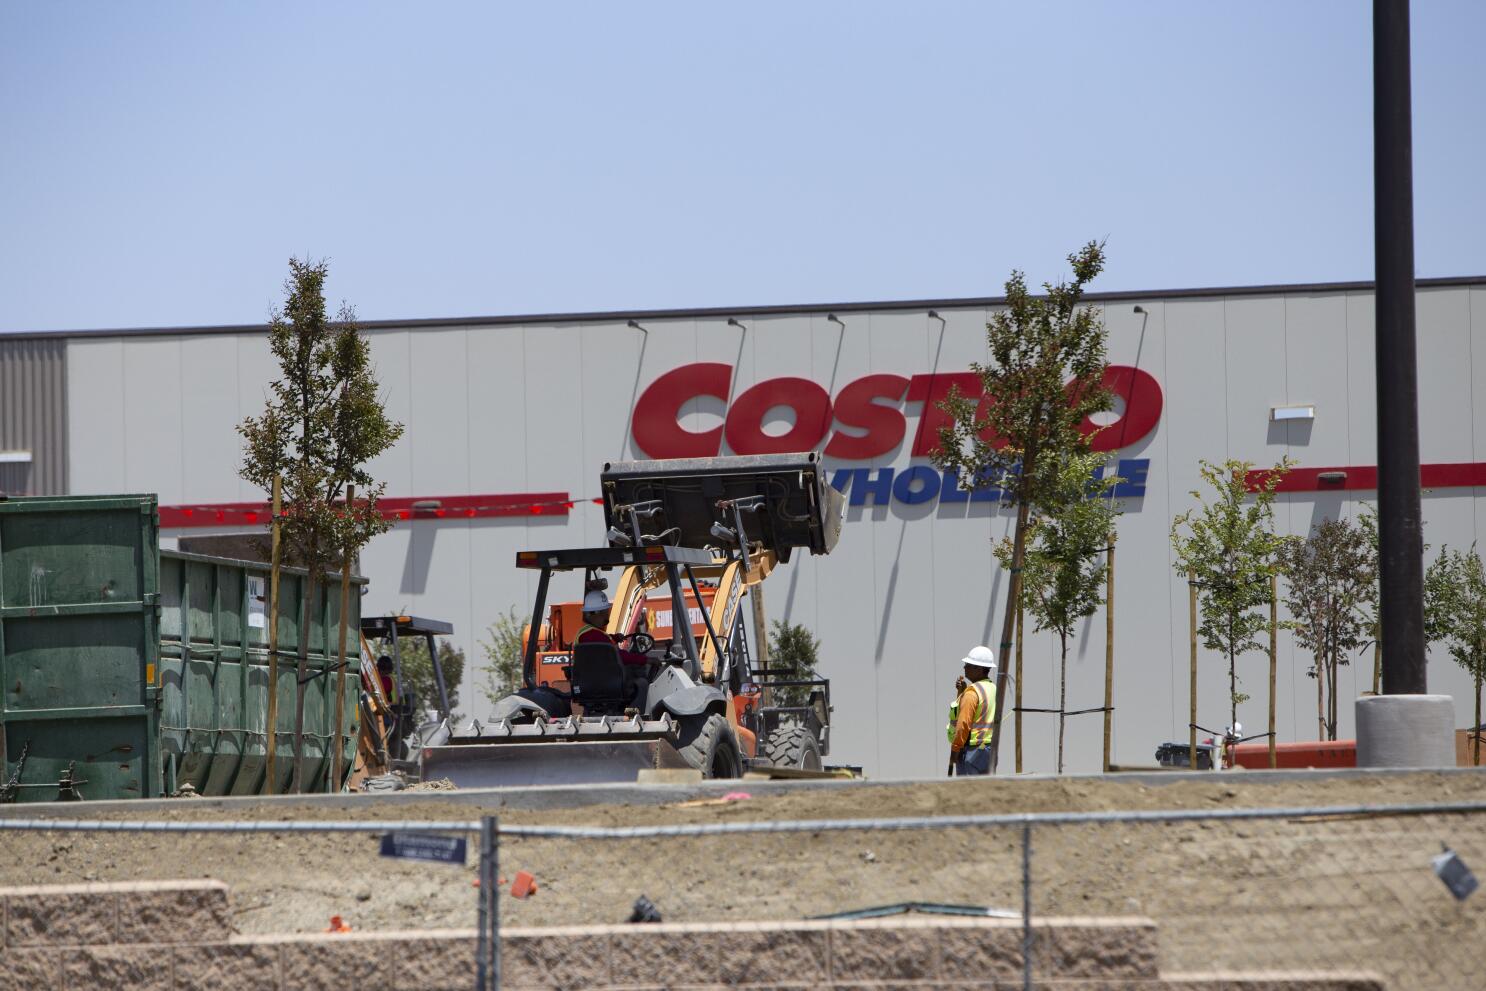 Costco planning to open new store in San Jose